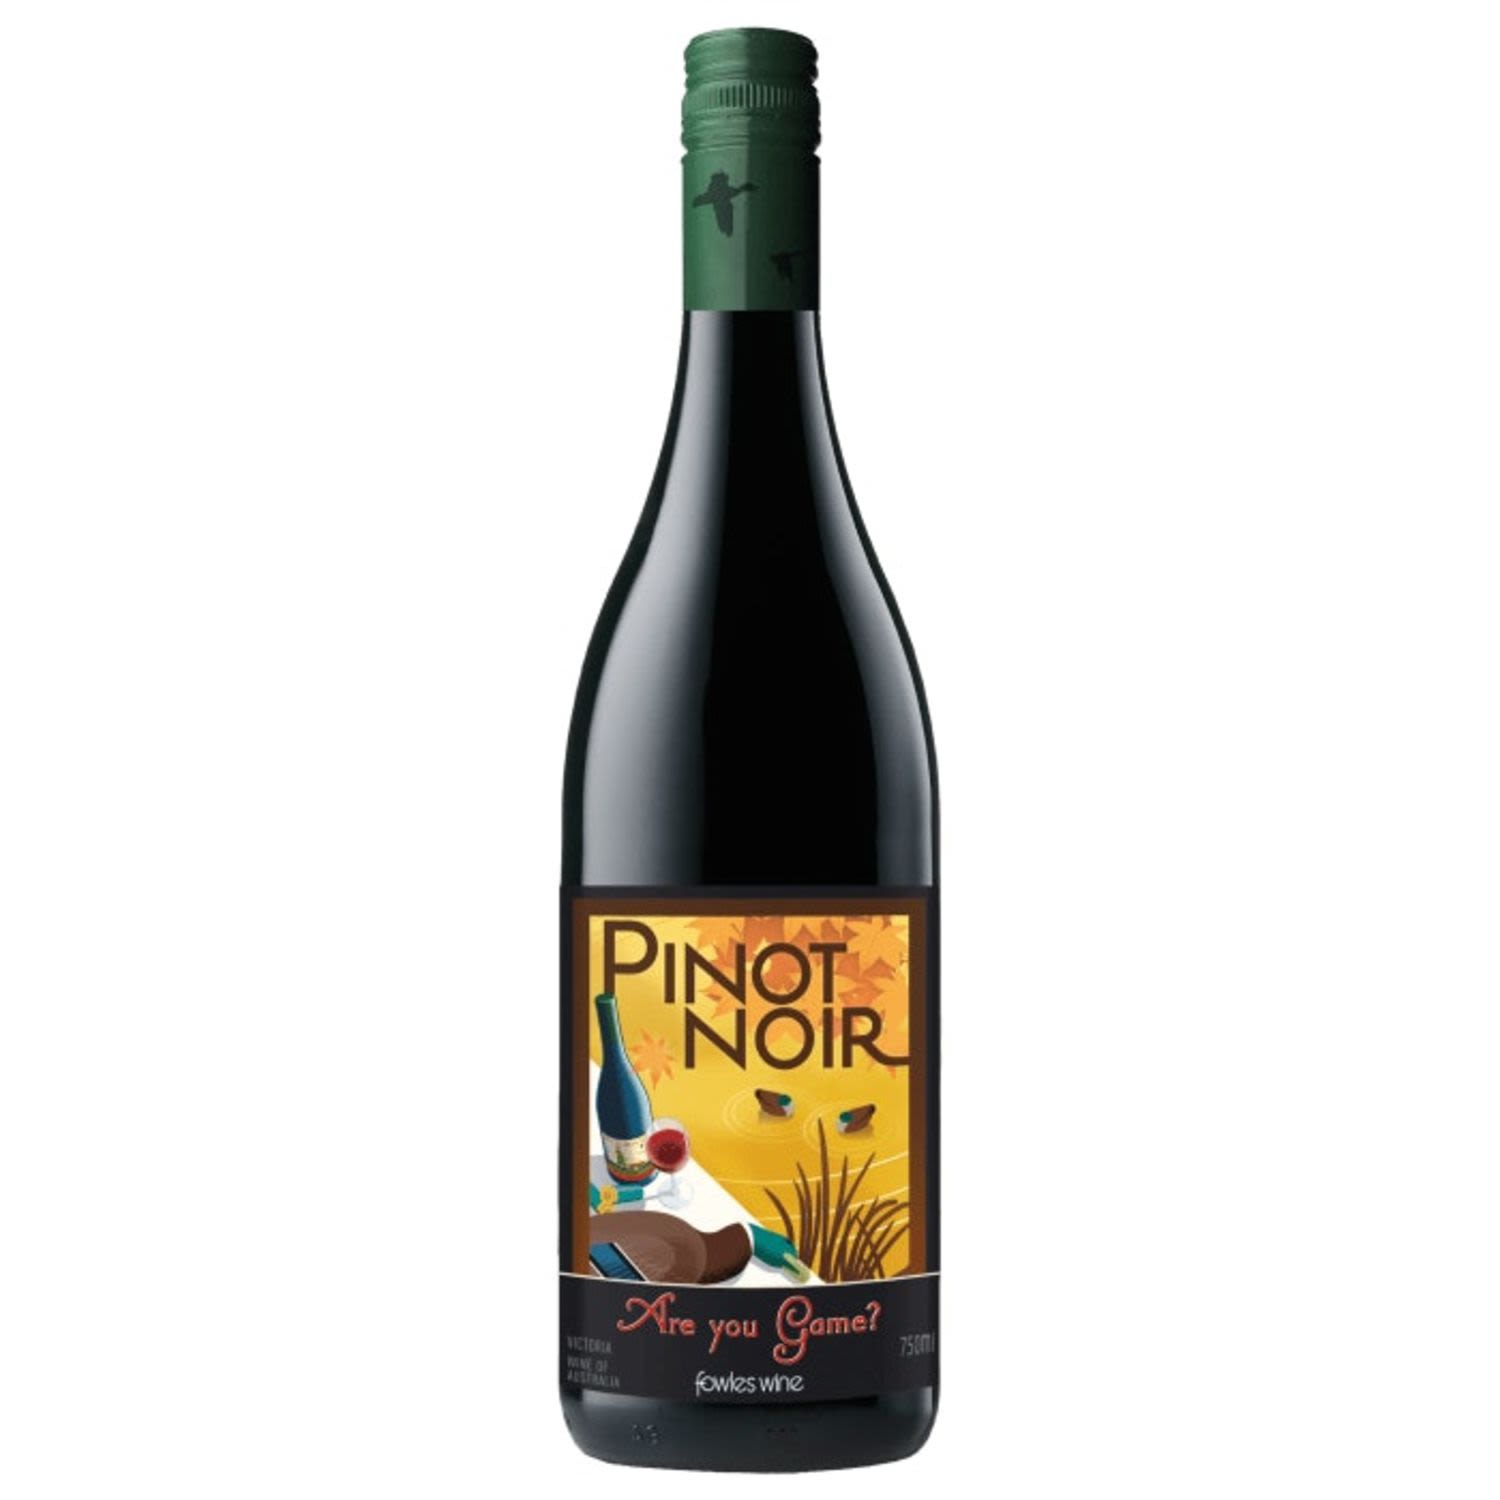 Fowles Wine Are You Game? Pinot Noir 750mL Bottle